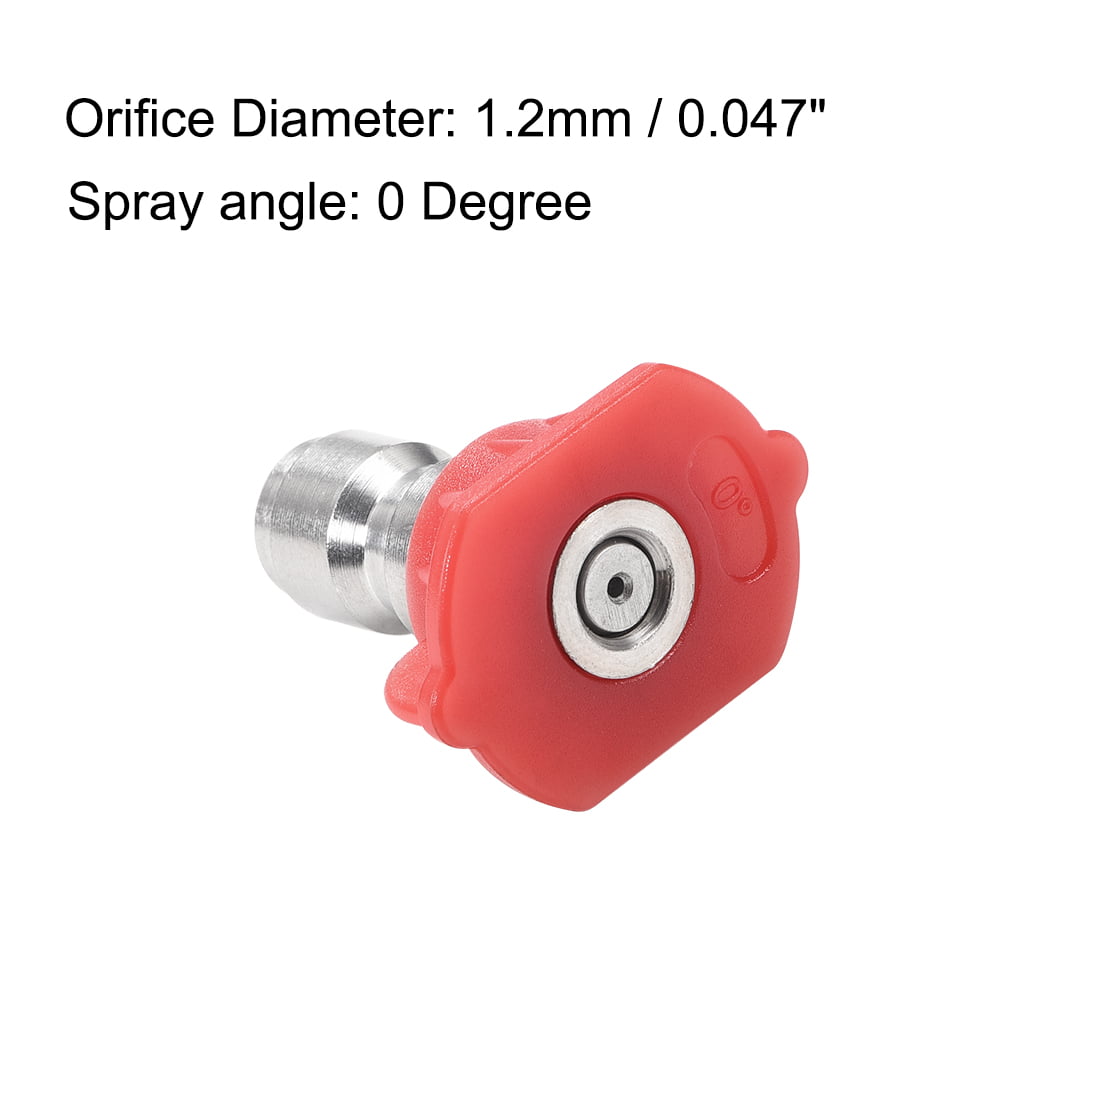 uxcell Pressure Washer Spray Nozzle Tips 1/4 inches Stainless Steel Flat Fan 2 Pcs 25 Degree 1.2mm Orifice Diameter 